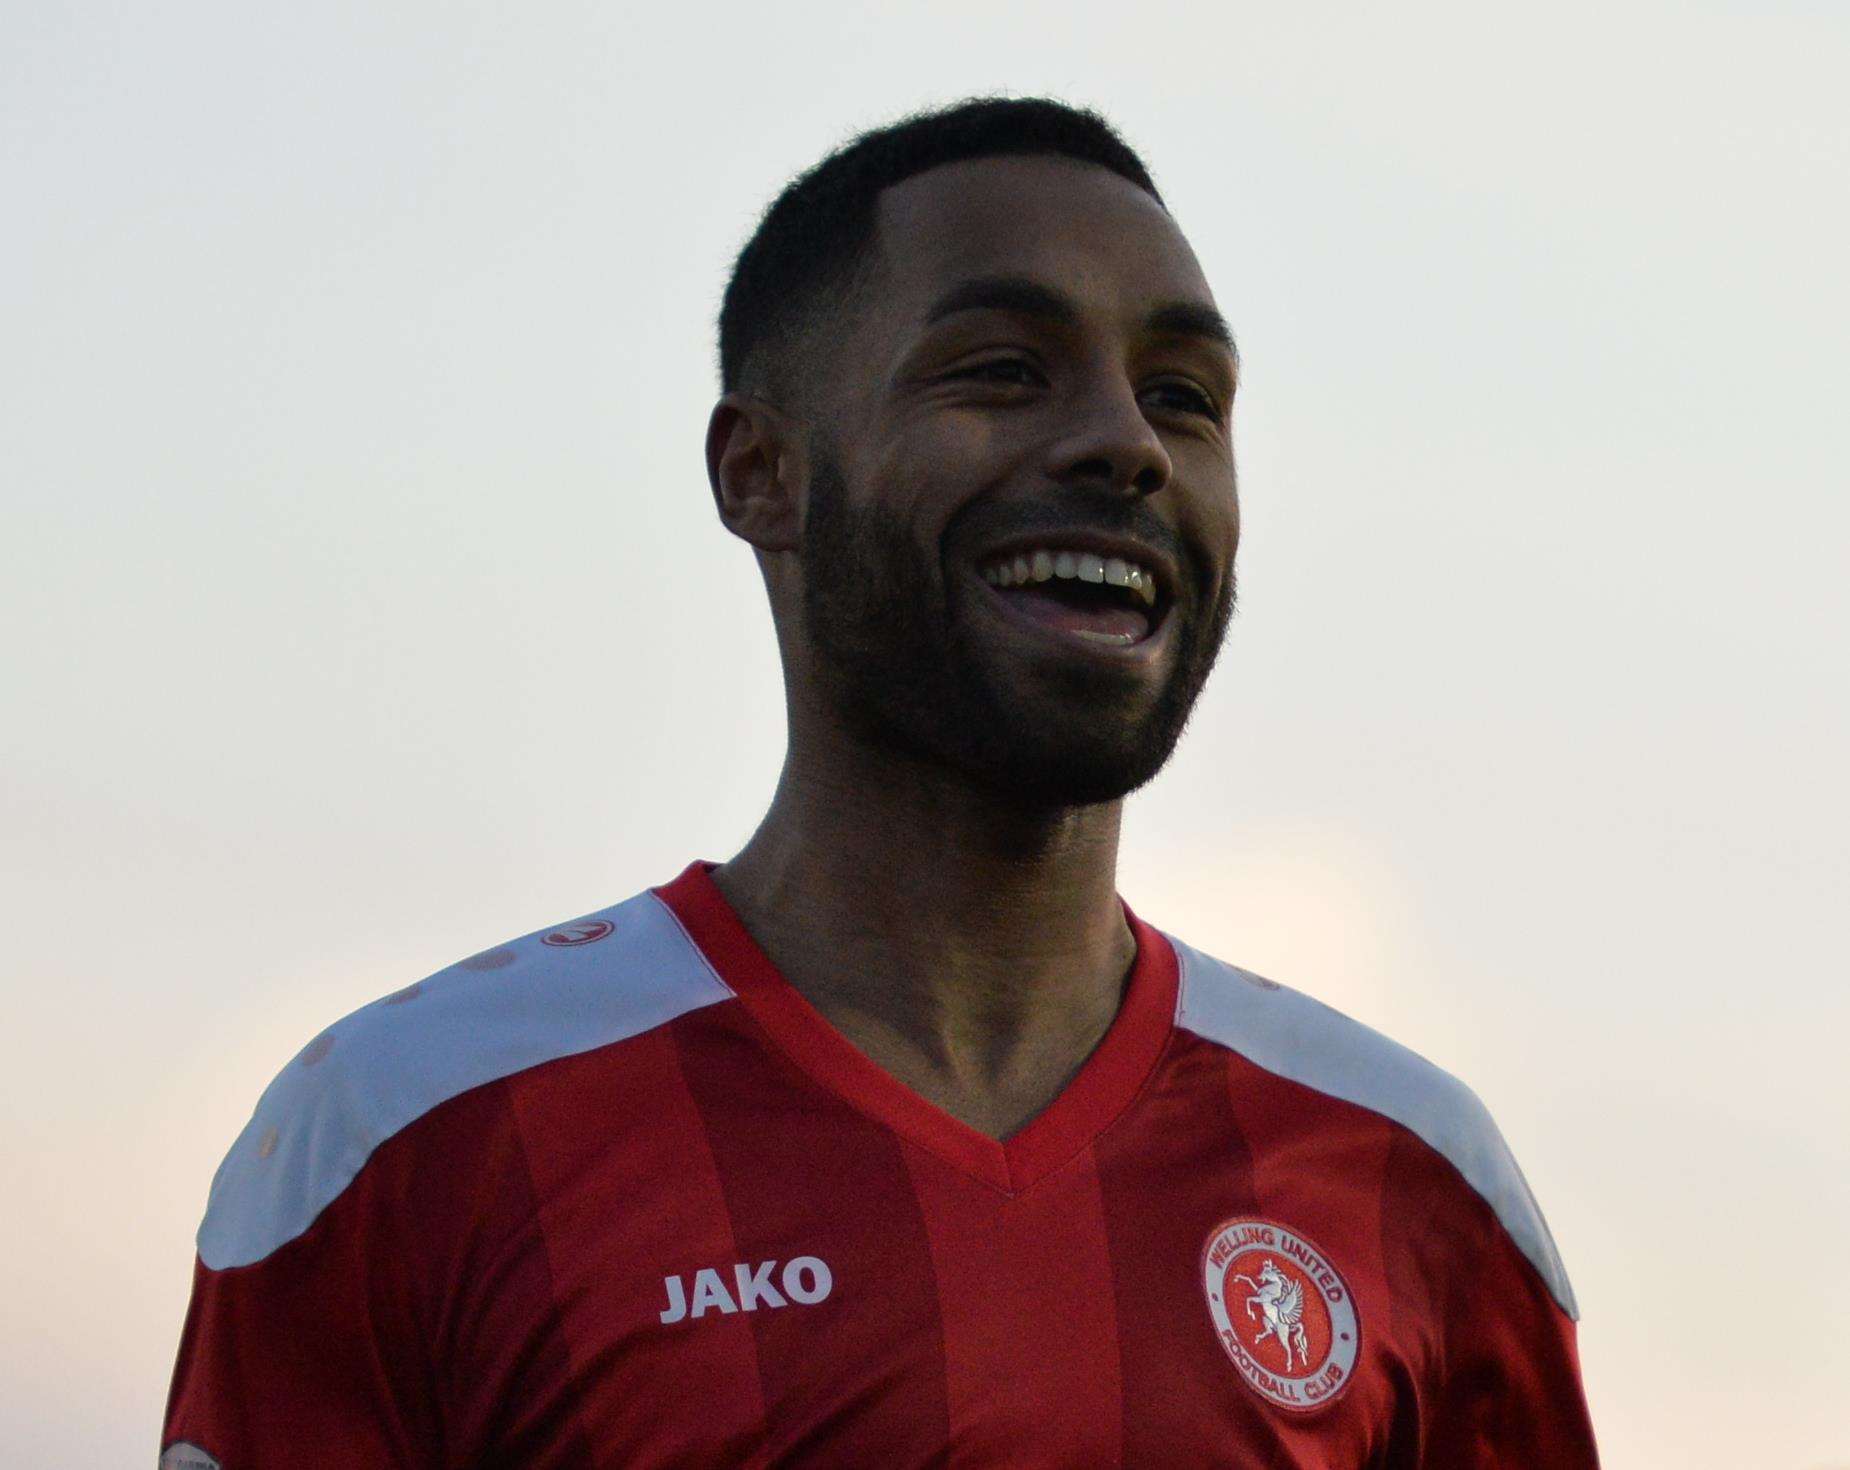 Welling striker Adam Coombes is a safe bet for goals this season